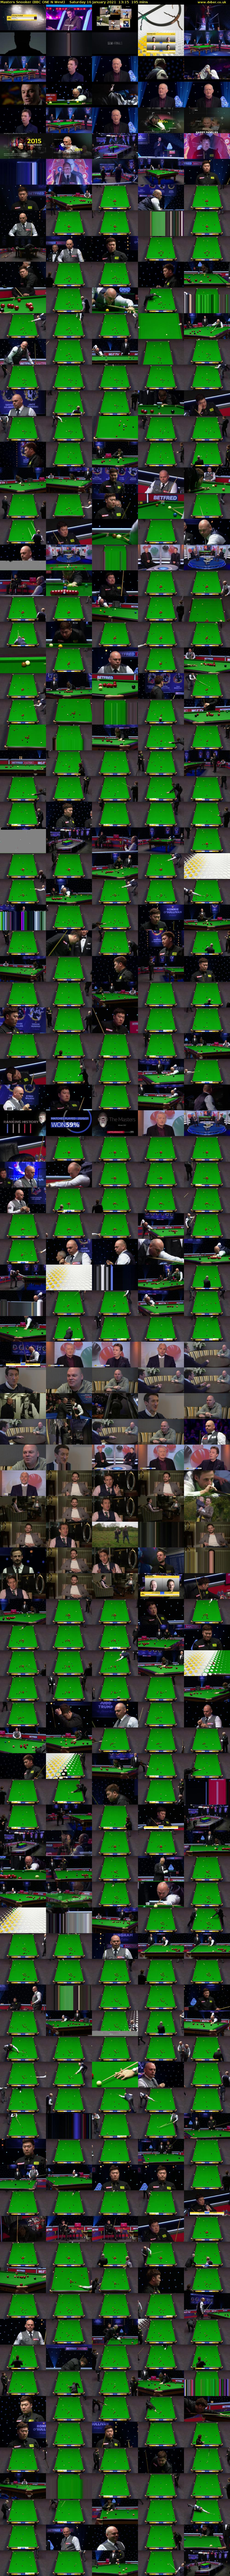 Masters Snooker (BBC ONE N West) Saturday 16 January 2021 13:15 - 16:30